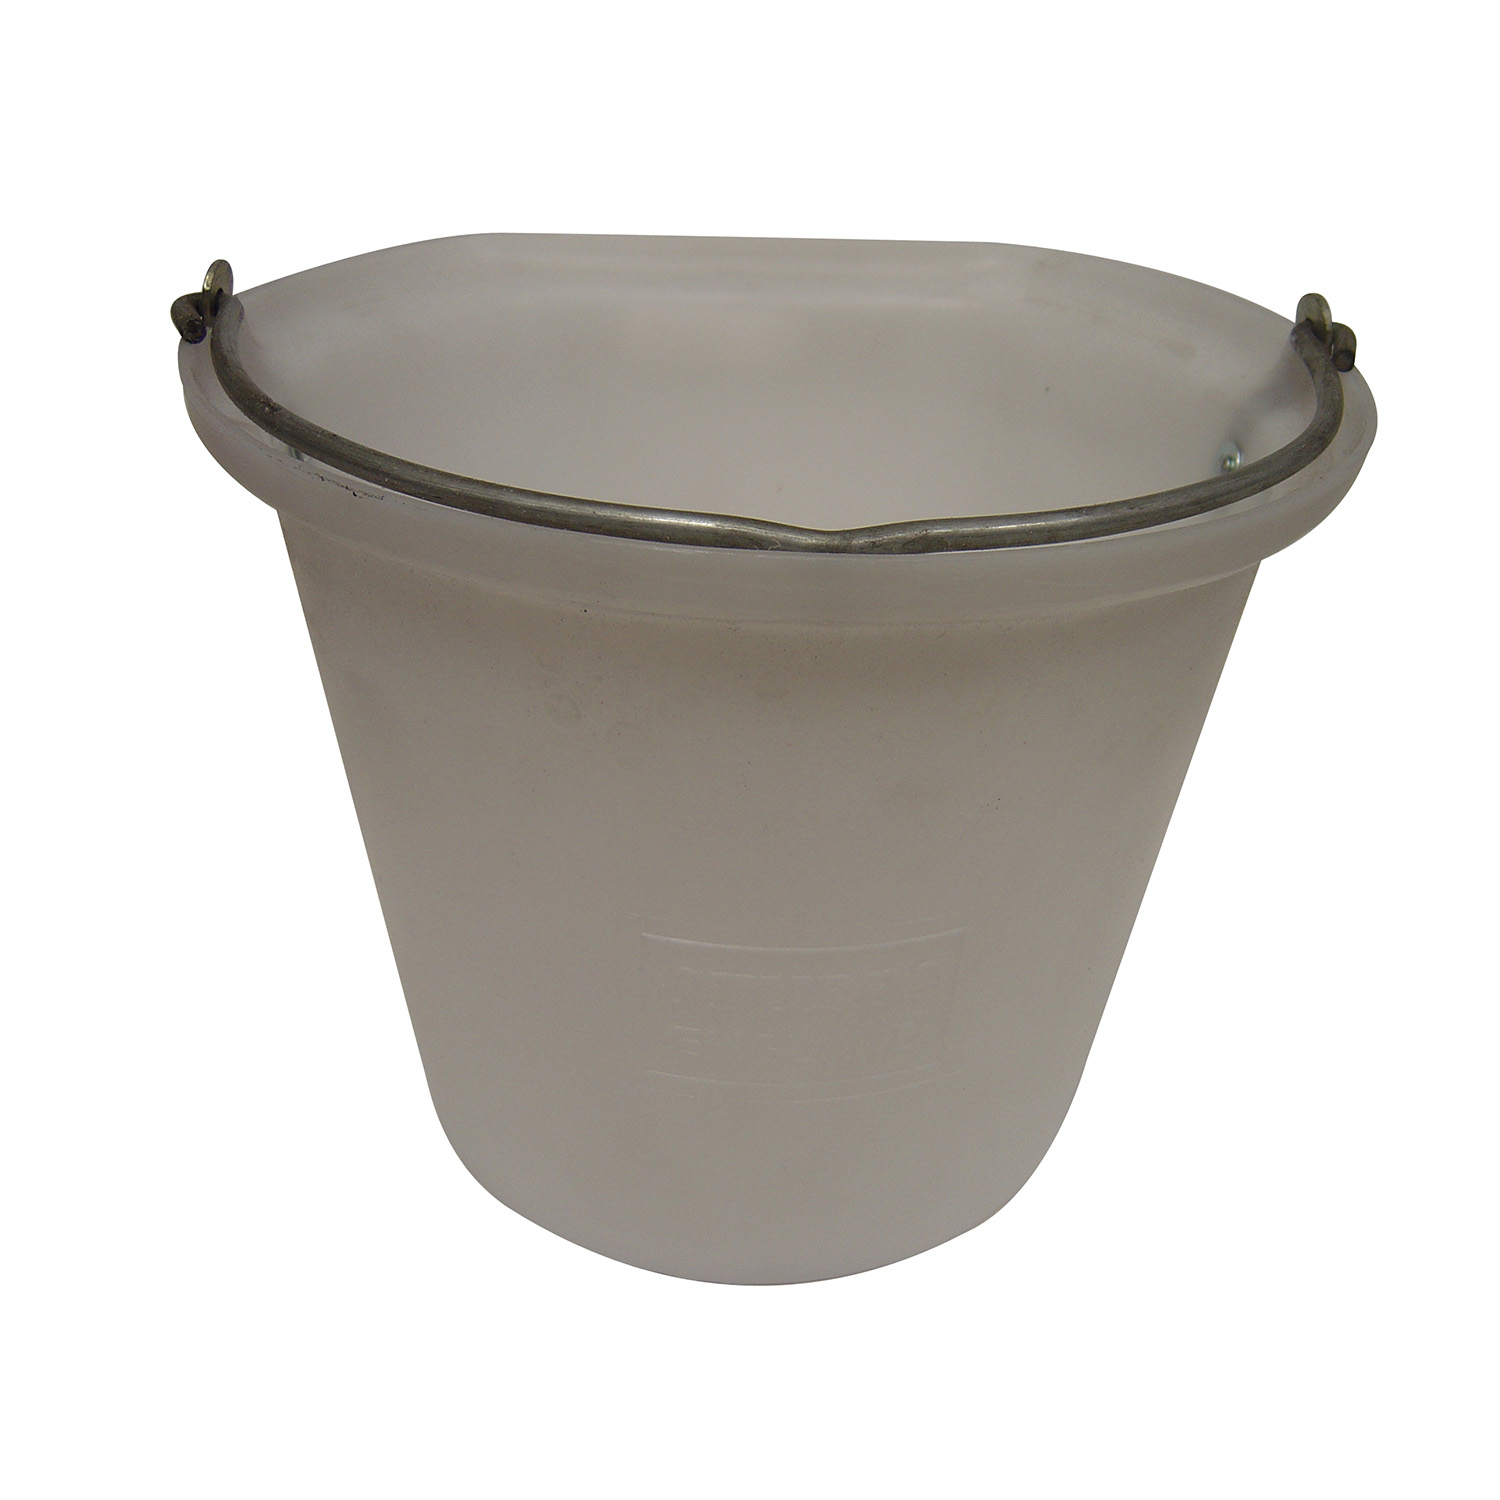 Stubbs Hanging Bucket Flat Sided 18 Litre